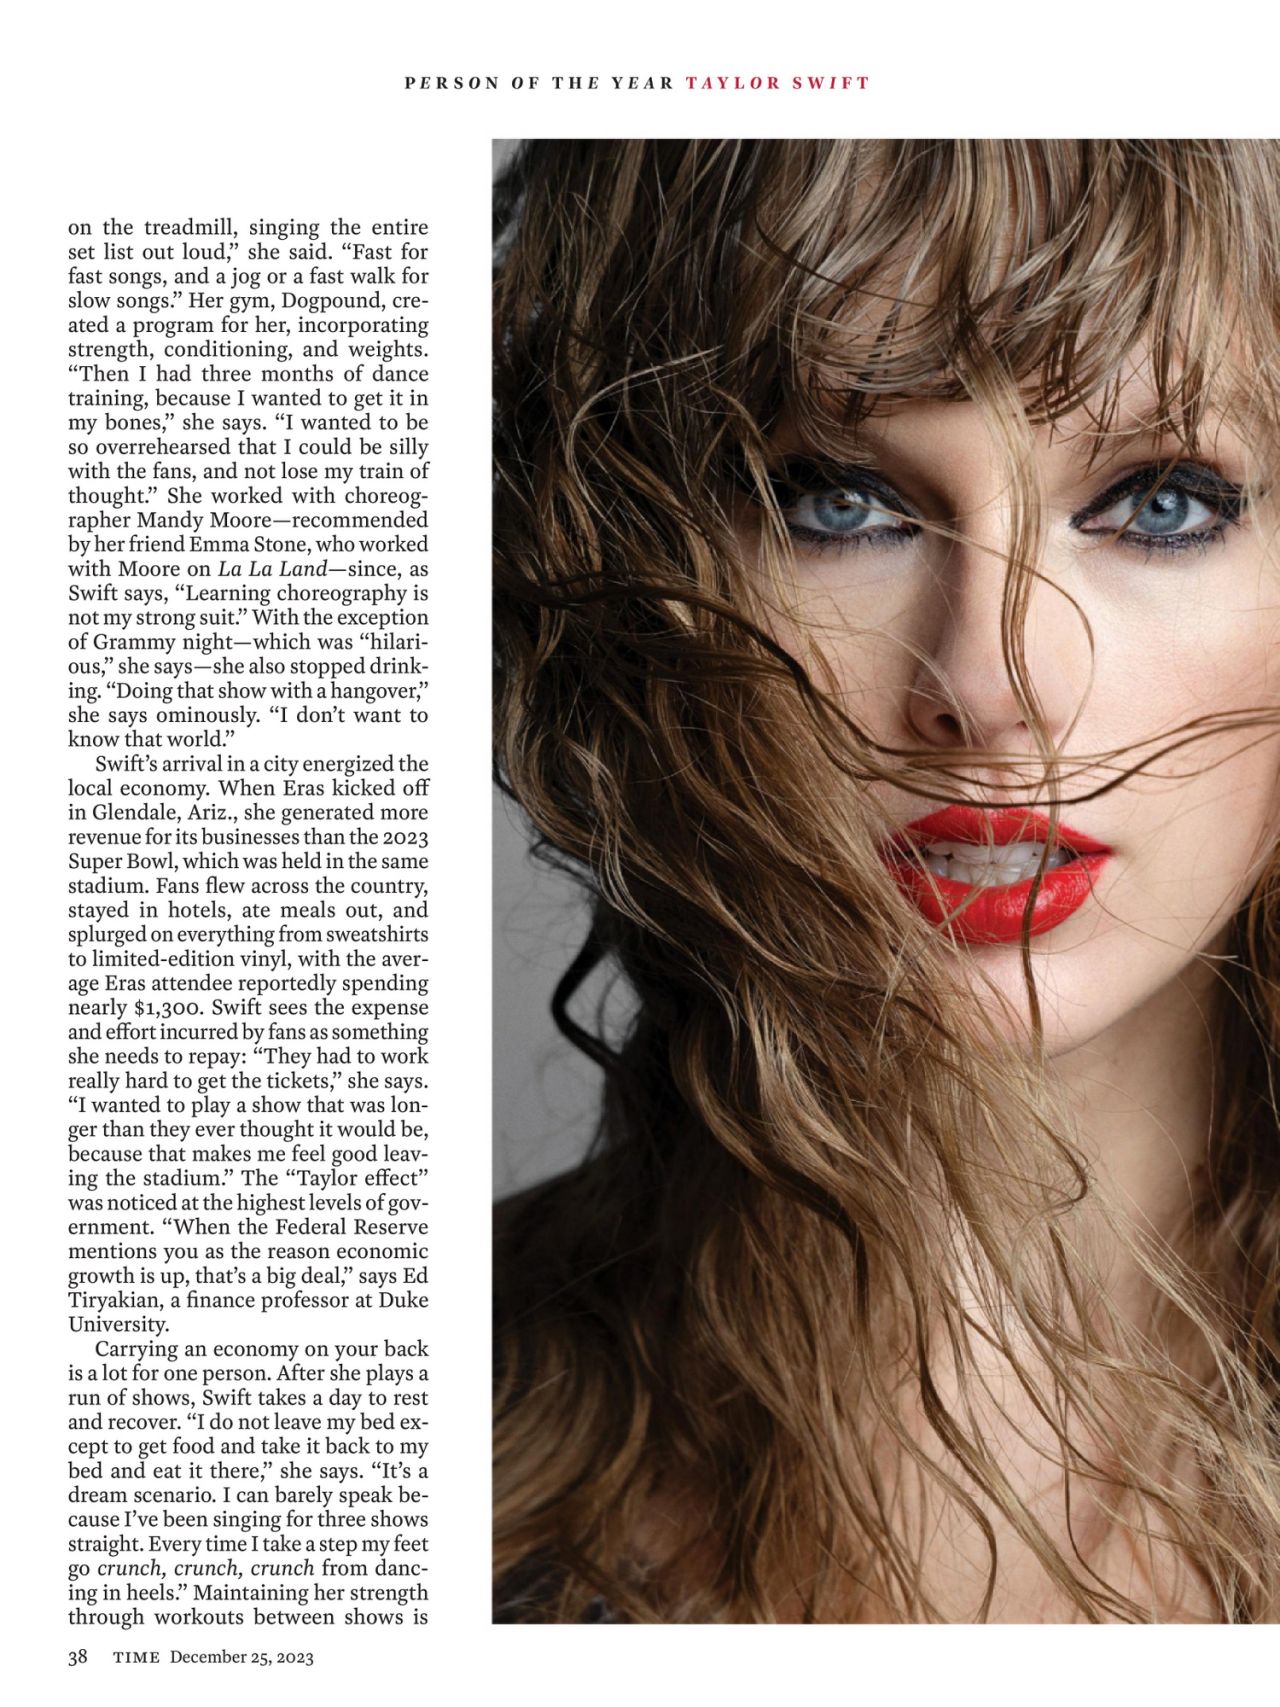 Taylor Swift Time 2023 Person of the Year 4